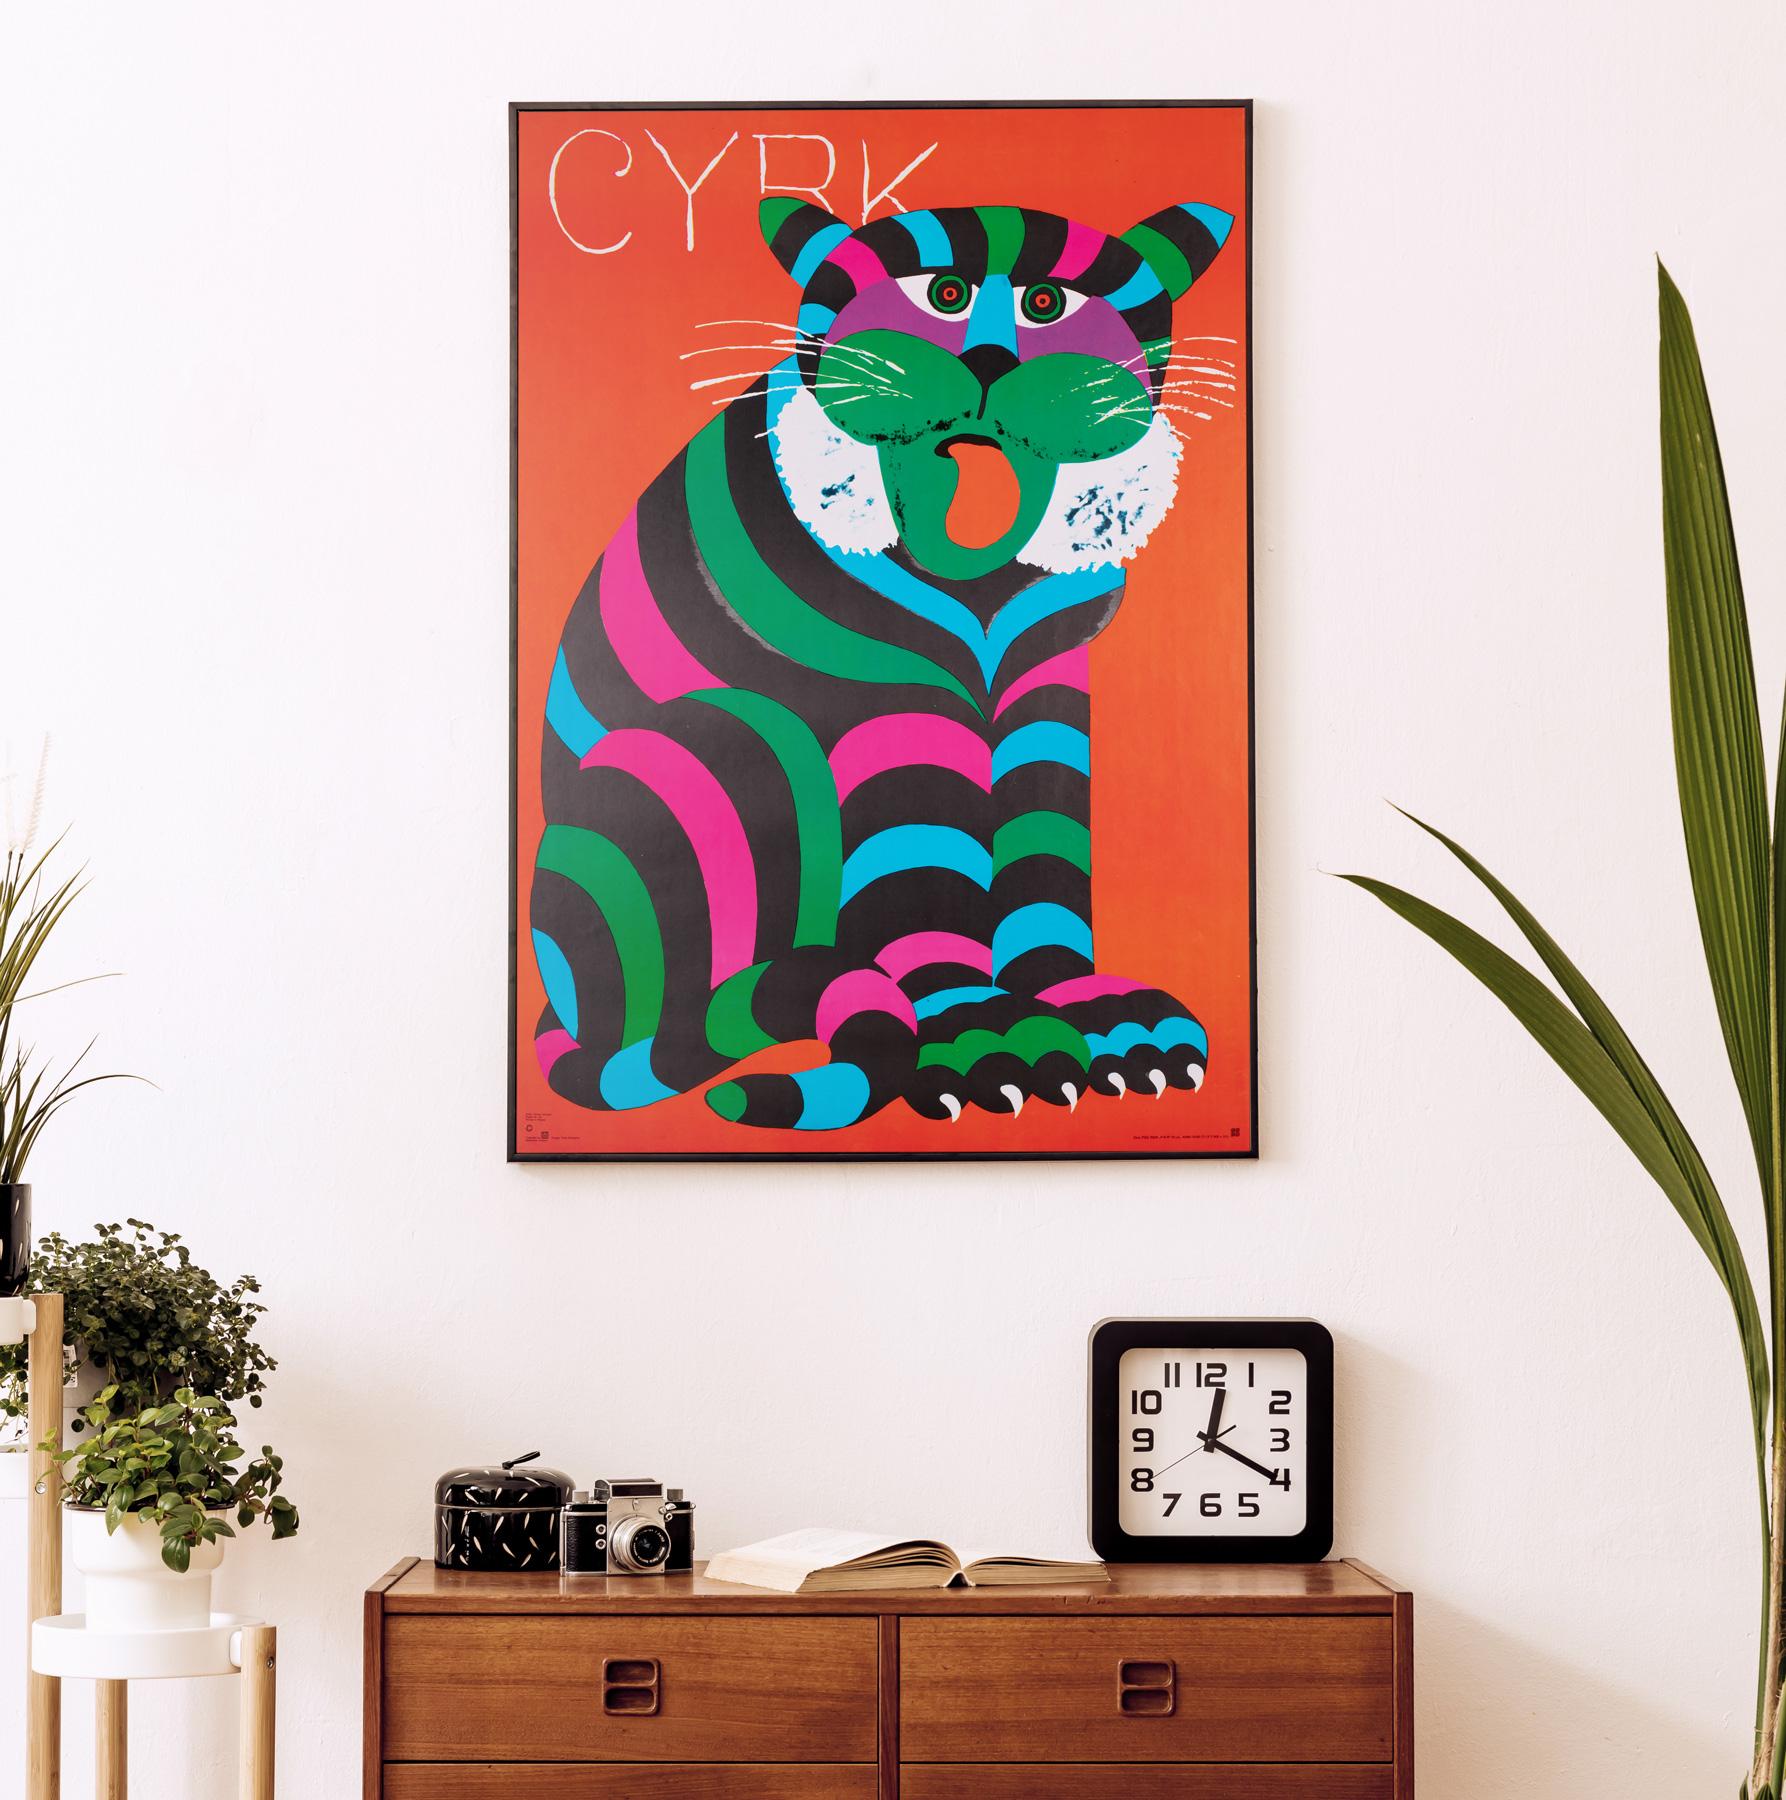 Original Polish cyrk (circus) poster featuring a wonderfully psychedelic large stripy cat design by Hubert Hilscher.

The ‘Cyrk” circus poster in Poland appeared for the first time in 1962 when the ZPR (Zjednoczone Przedsiębiorstwa Rozrywkowe, or